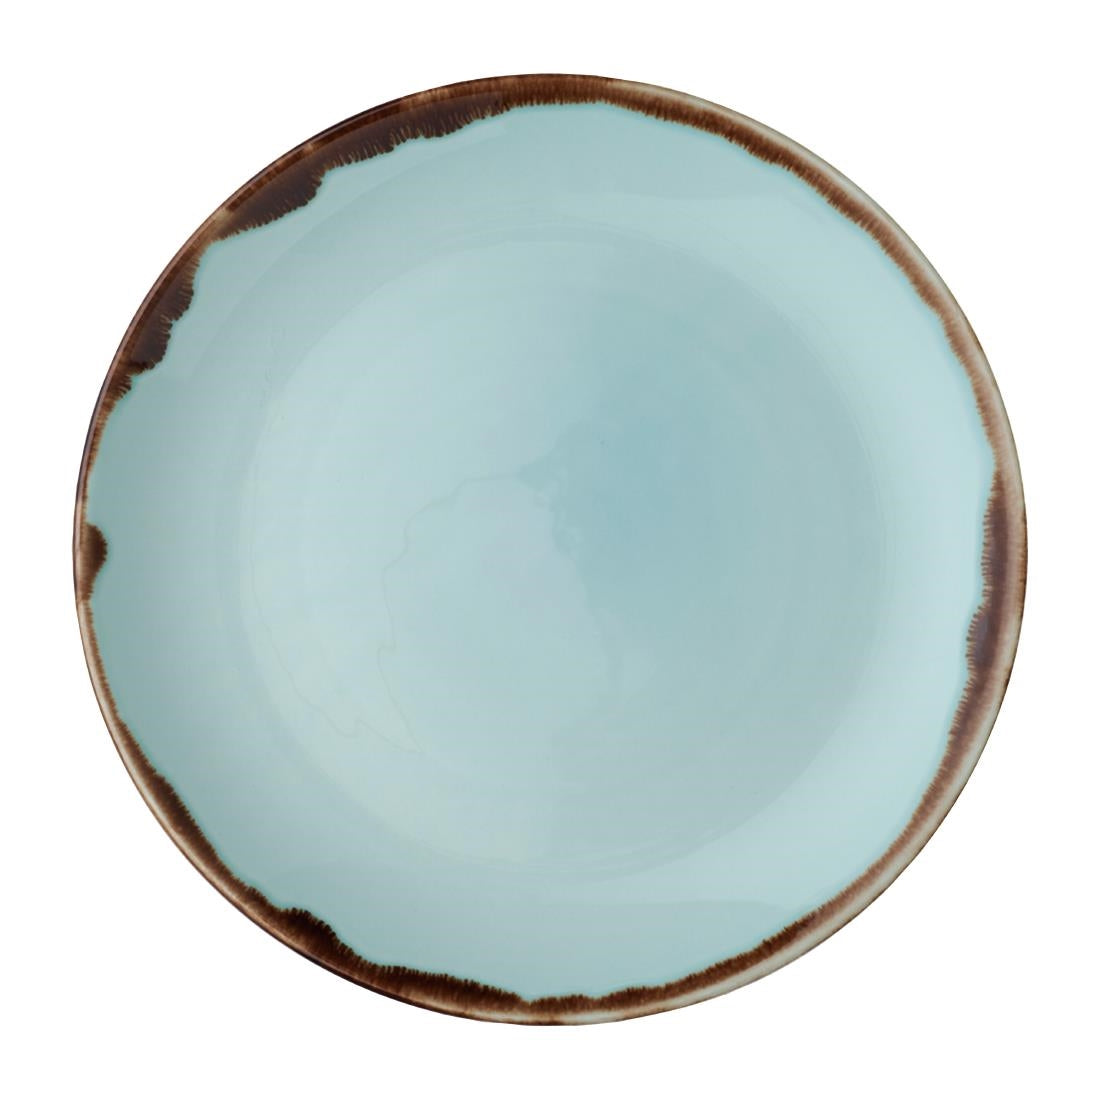 FX168 Dudson Harvest Coupe Plates Turquoise 217mm (Pack of 12) JD Catering Equipment Solutions Ltd